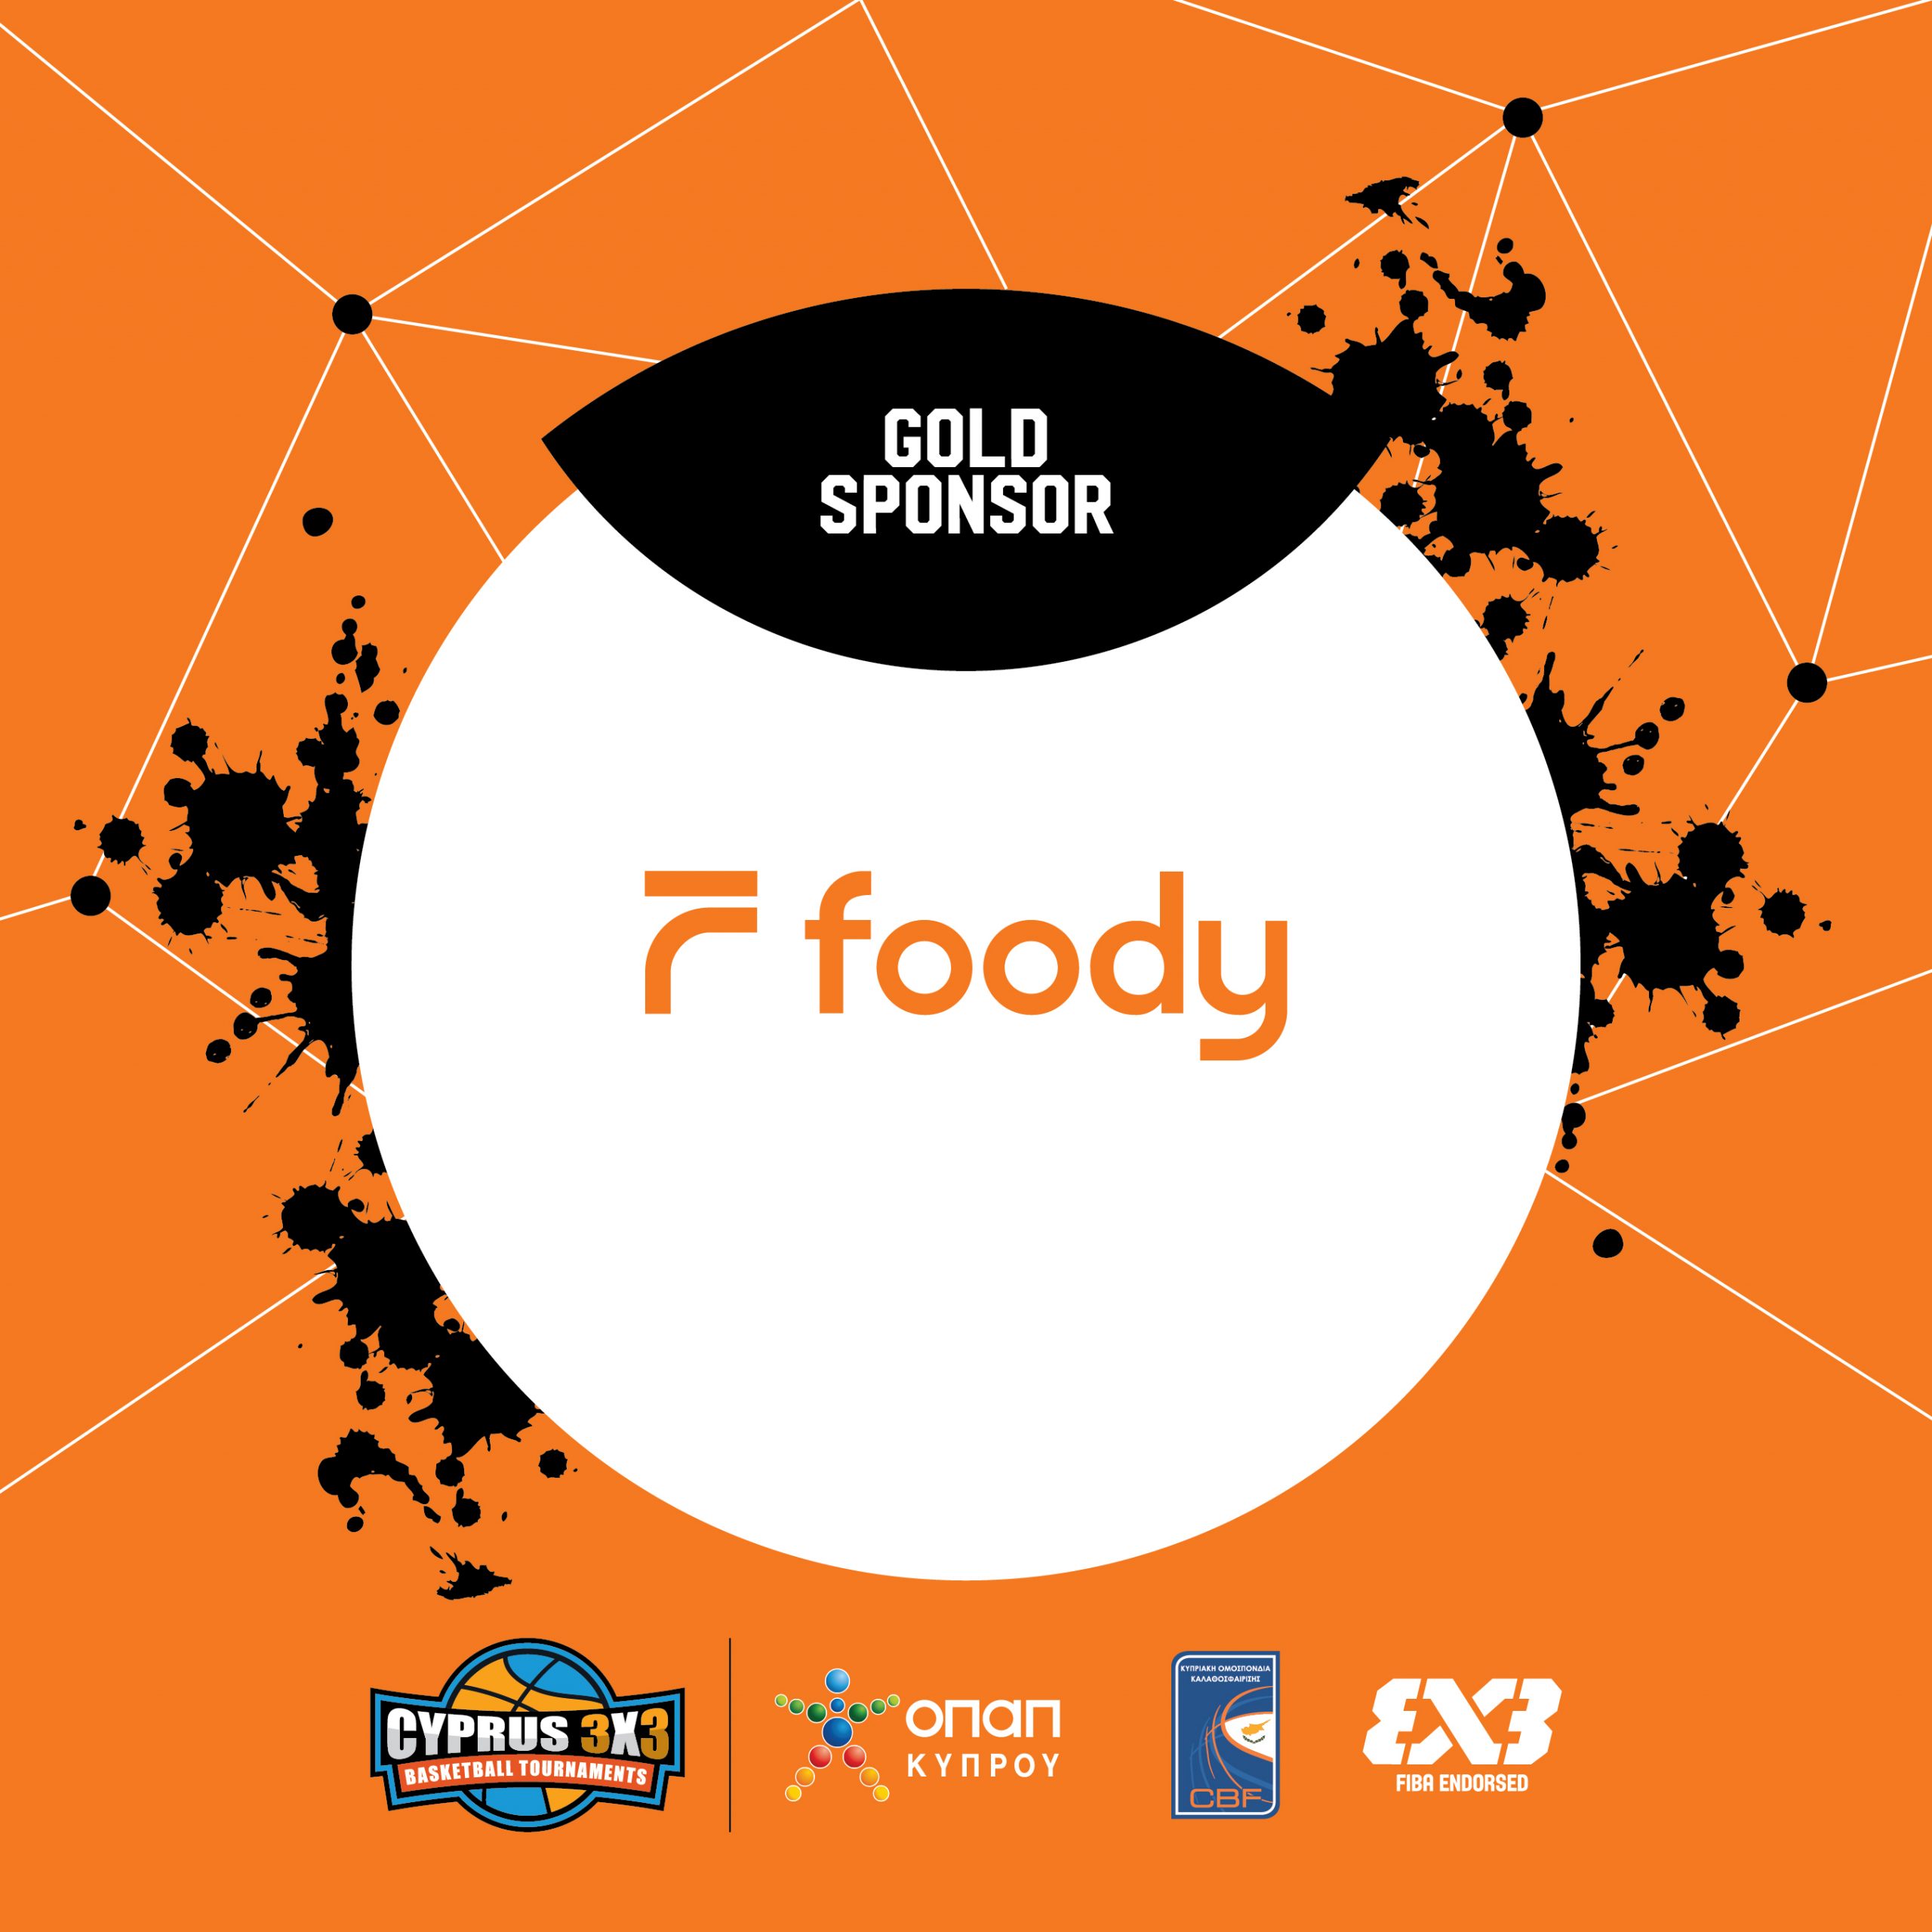 Foody Supports Cyprus 3×3 as a Gold Sponsor